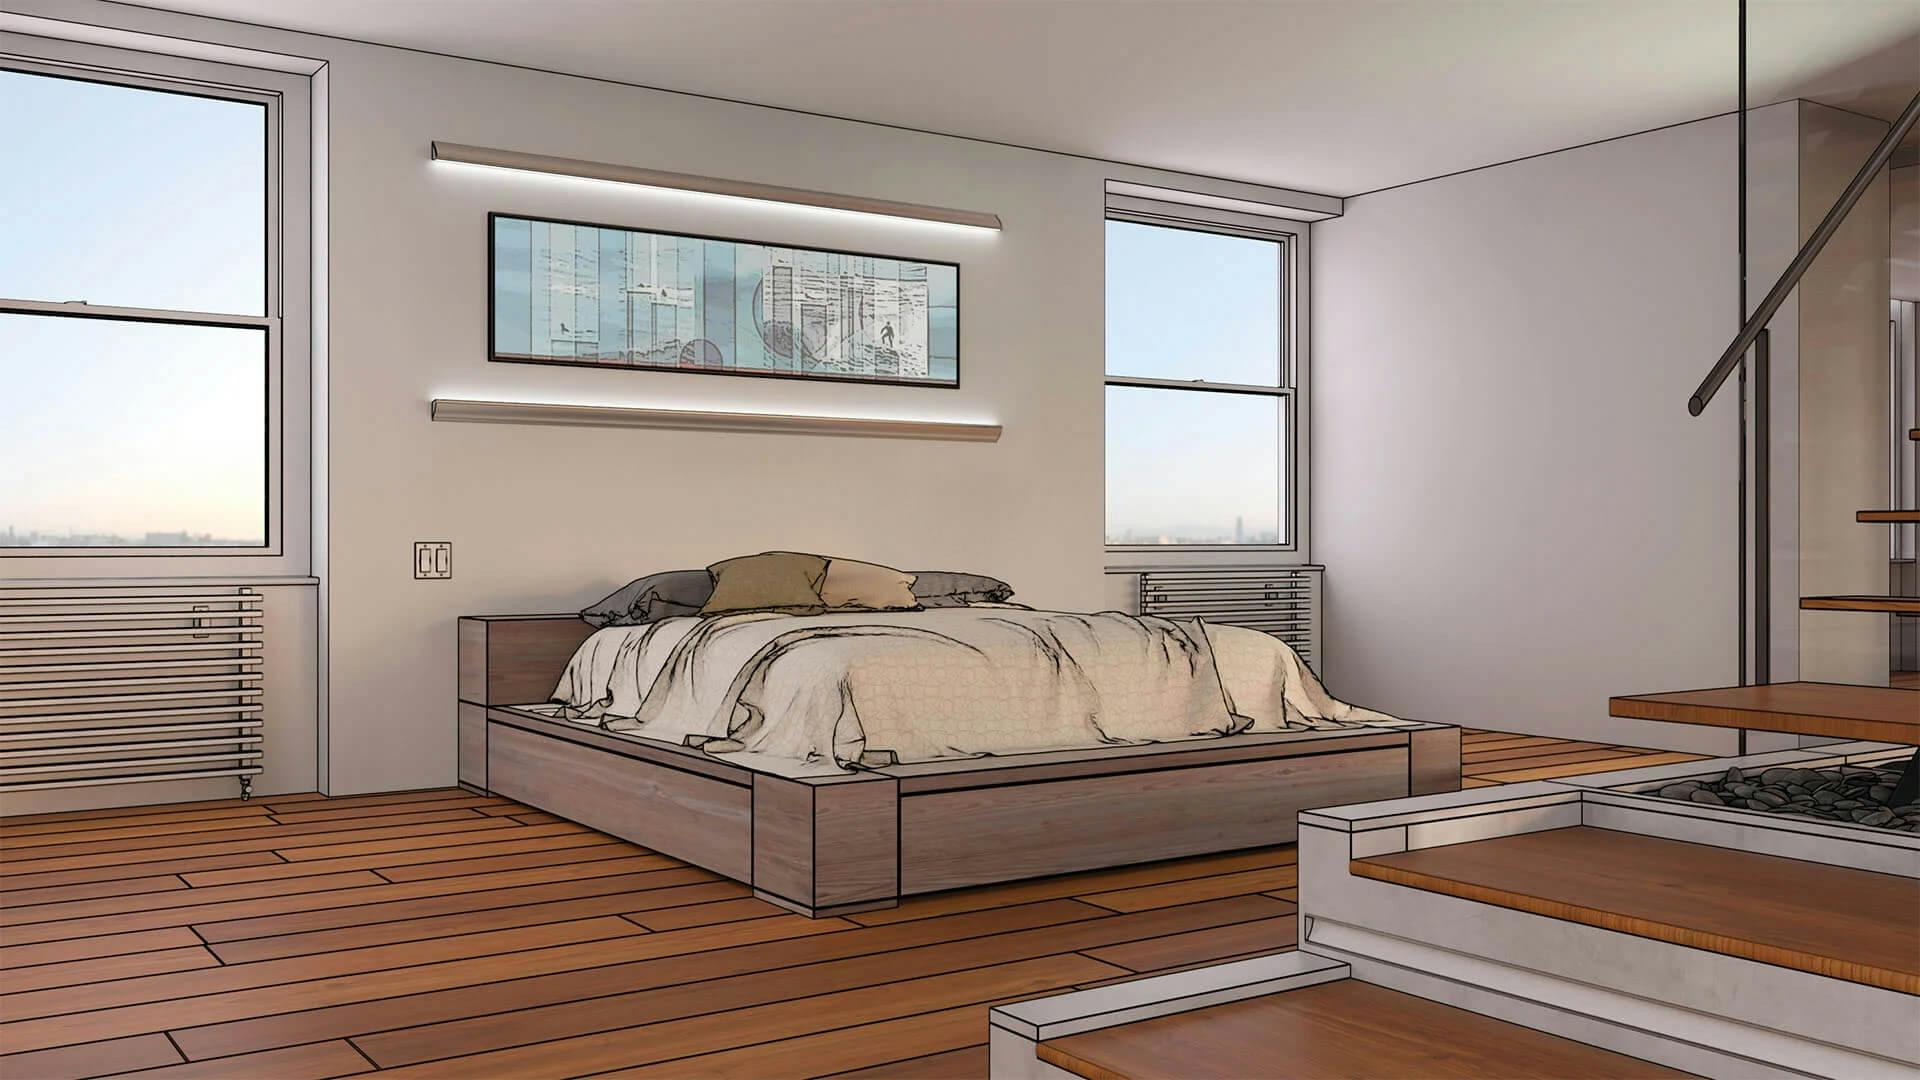 Illustration of a bedroom featuring tape channel lights above the bed.